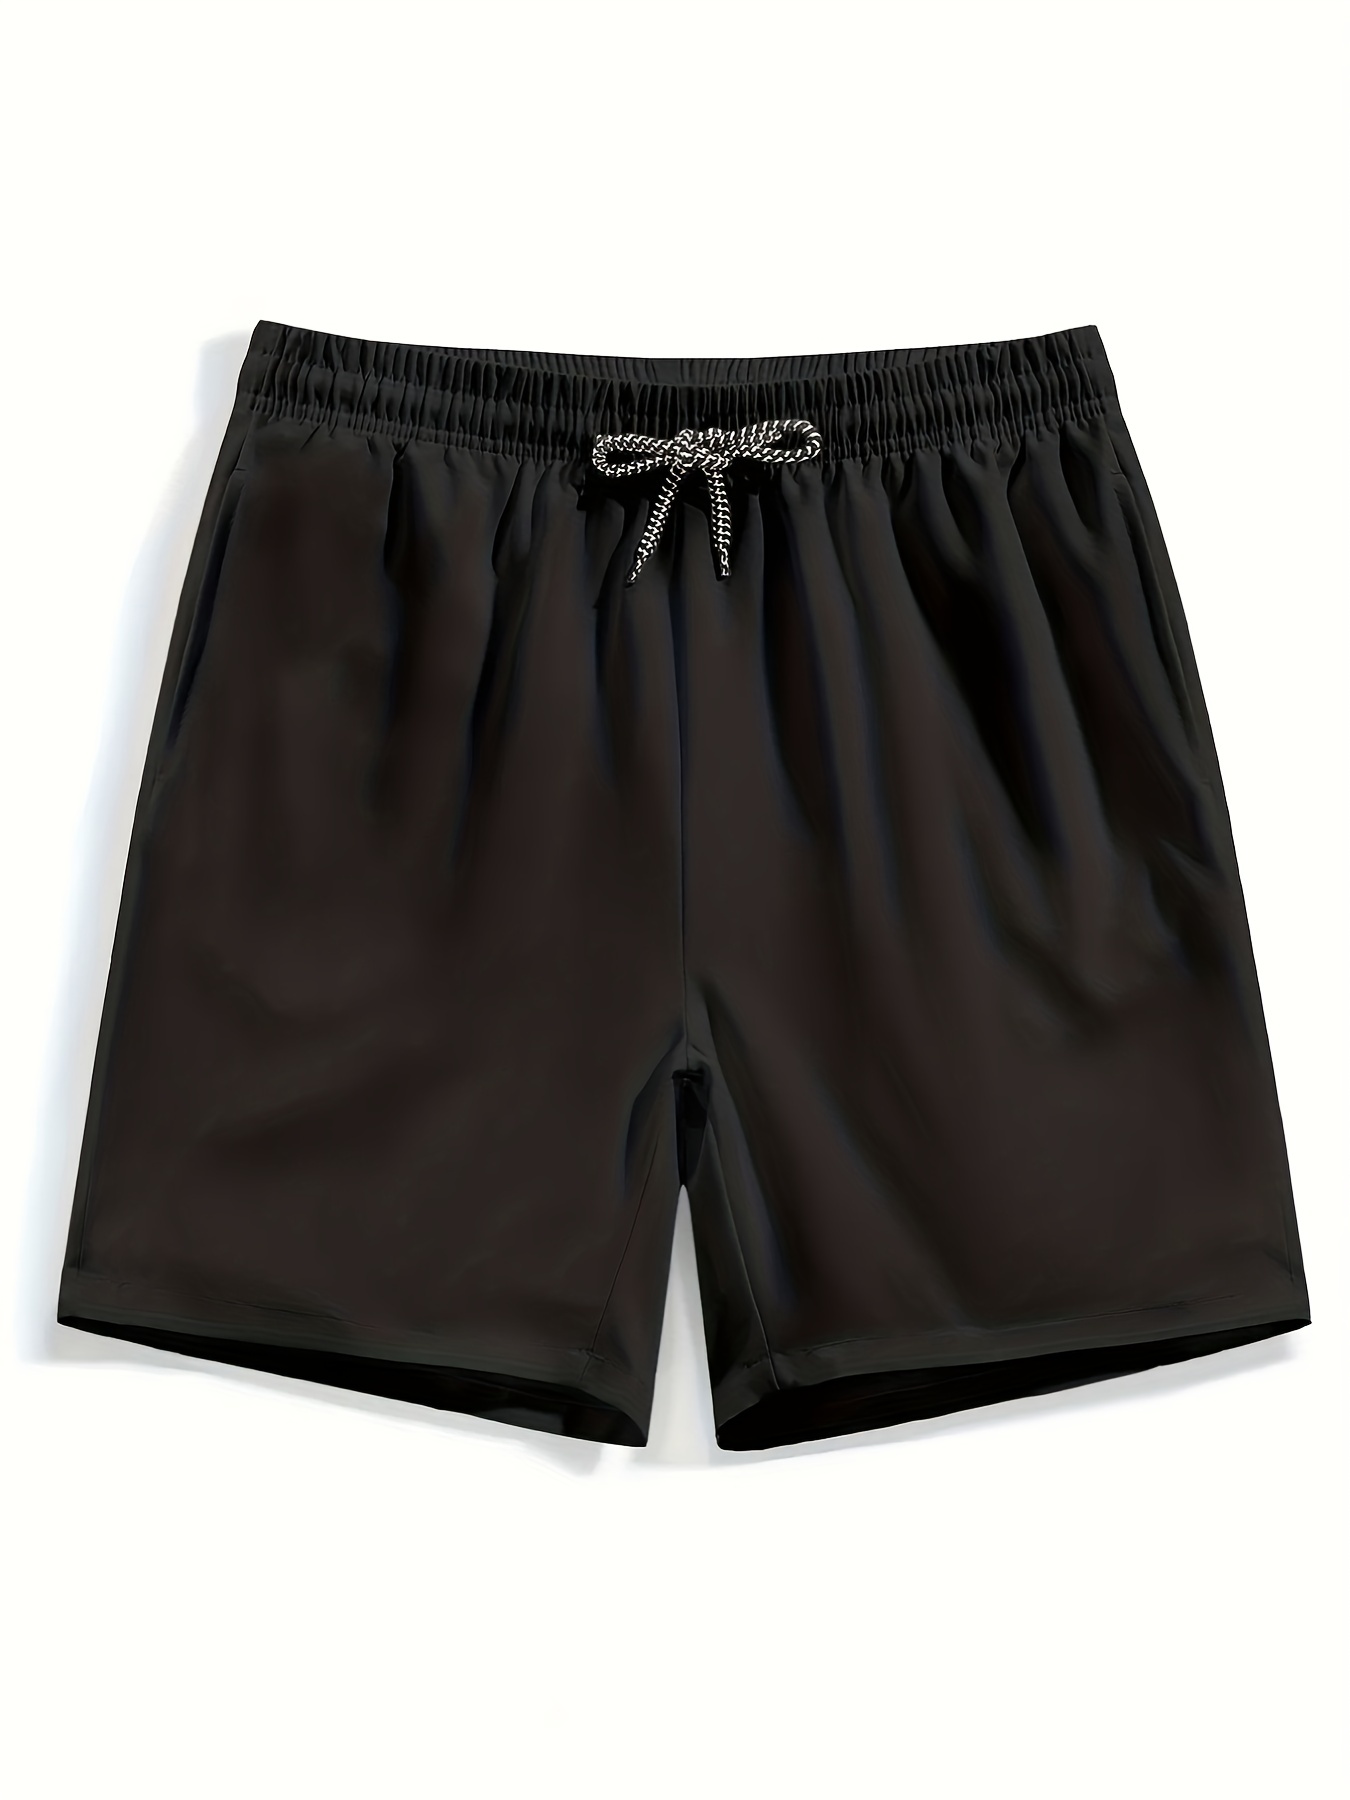 Casual trousers and shorts for sporty men